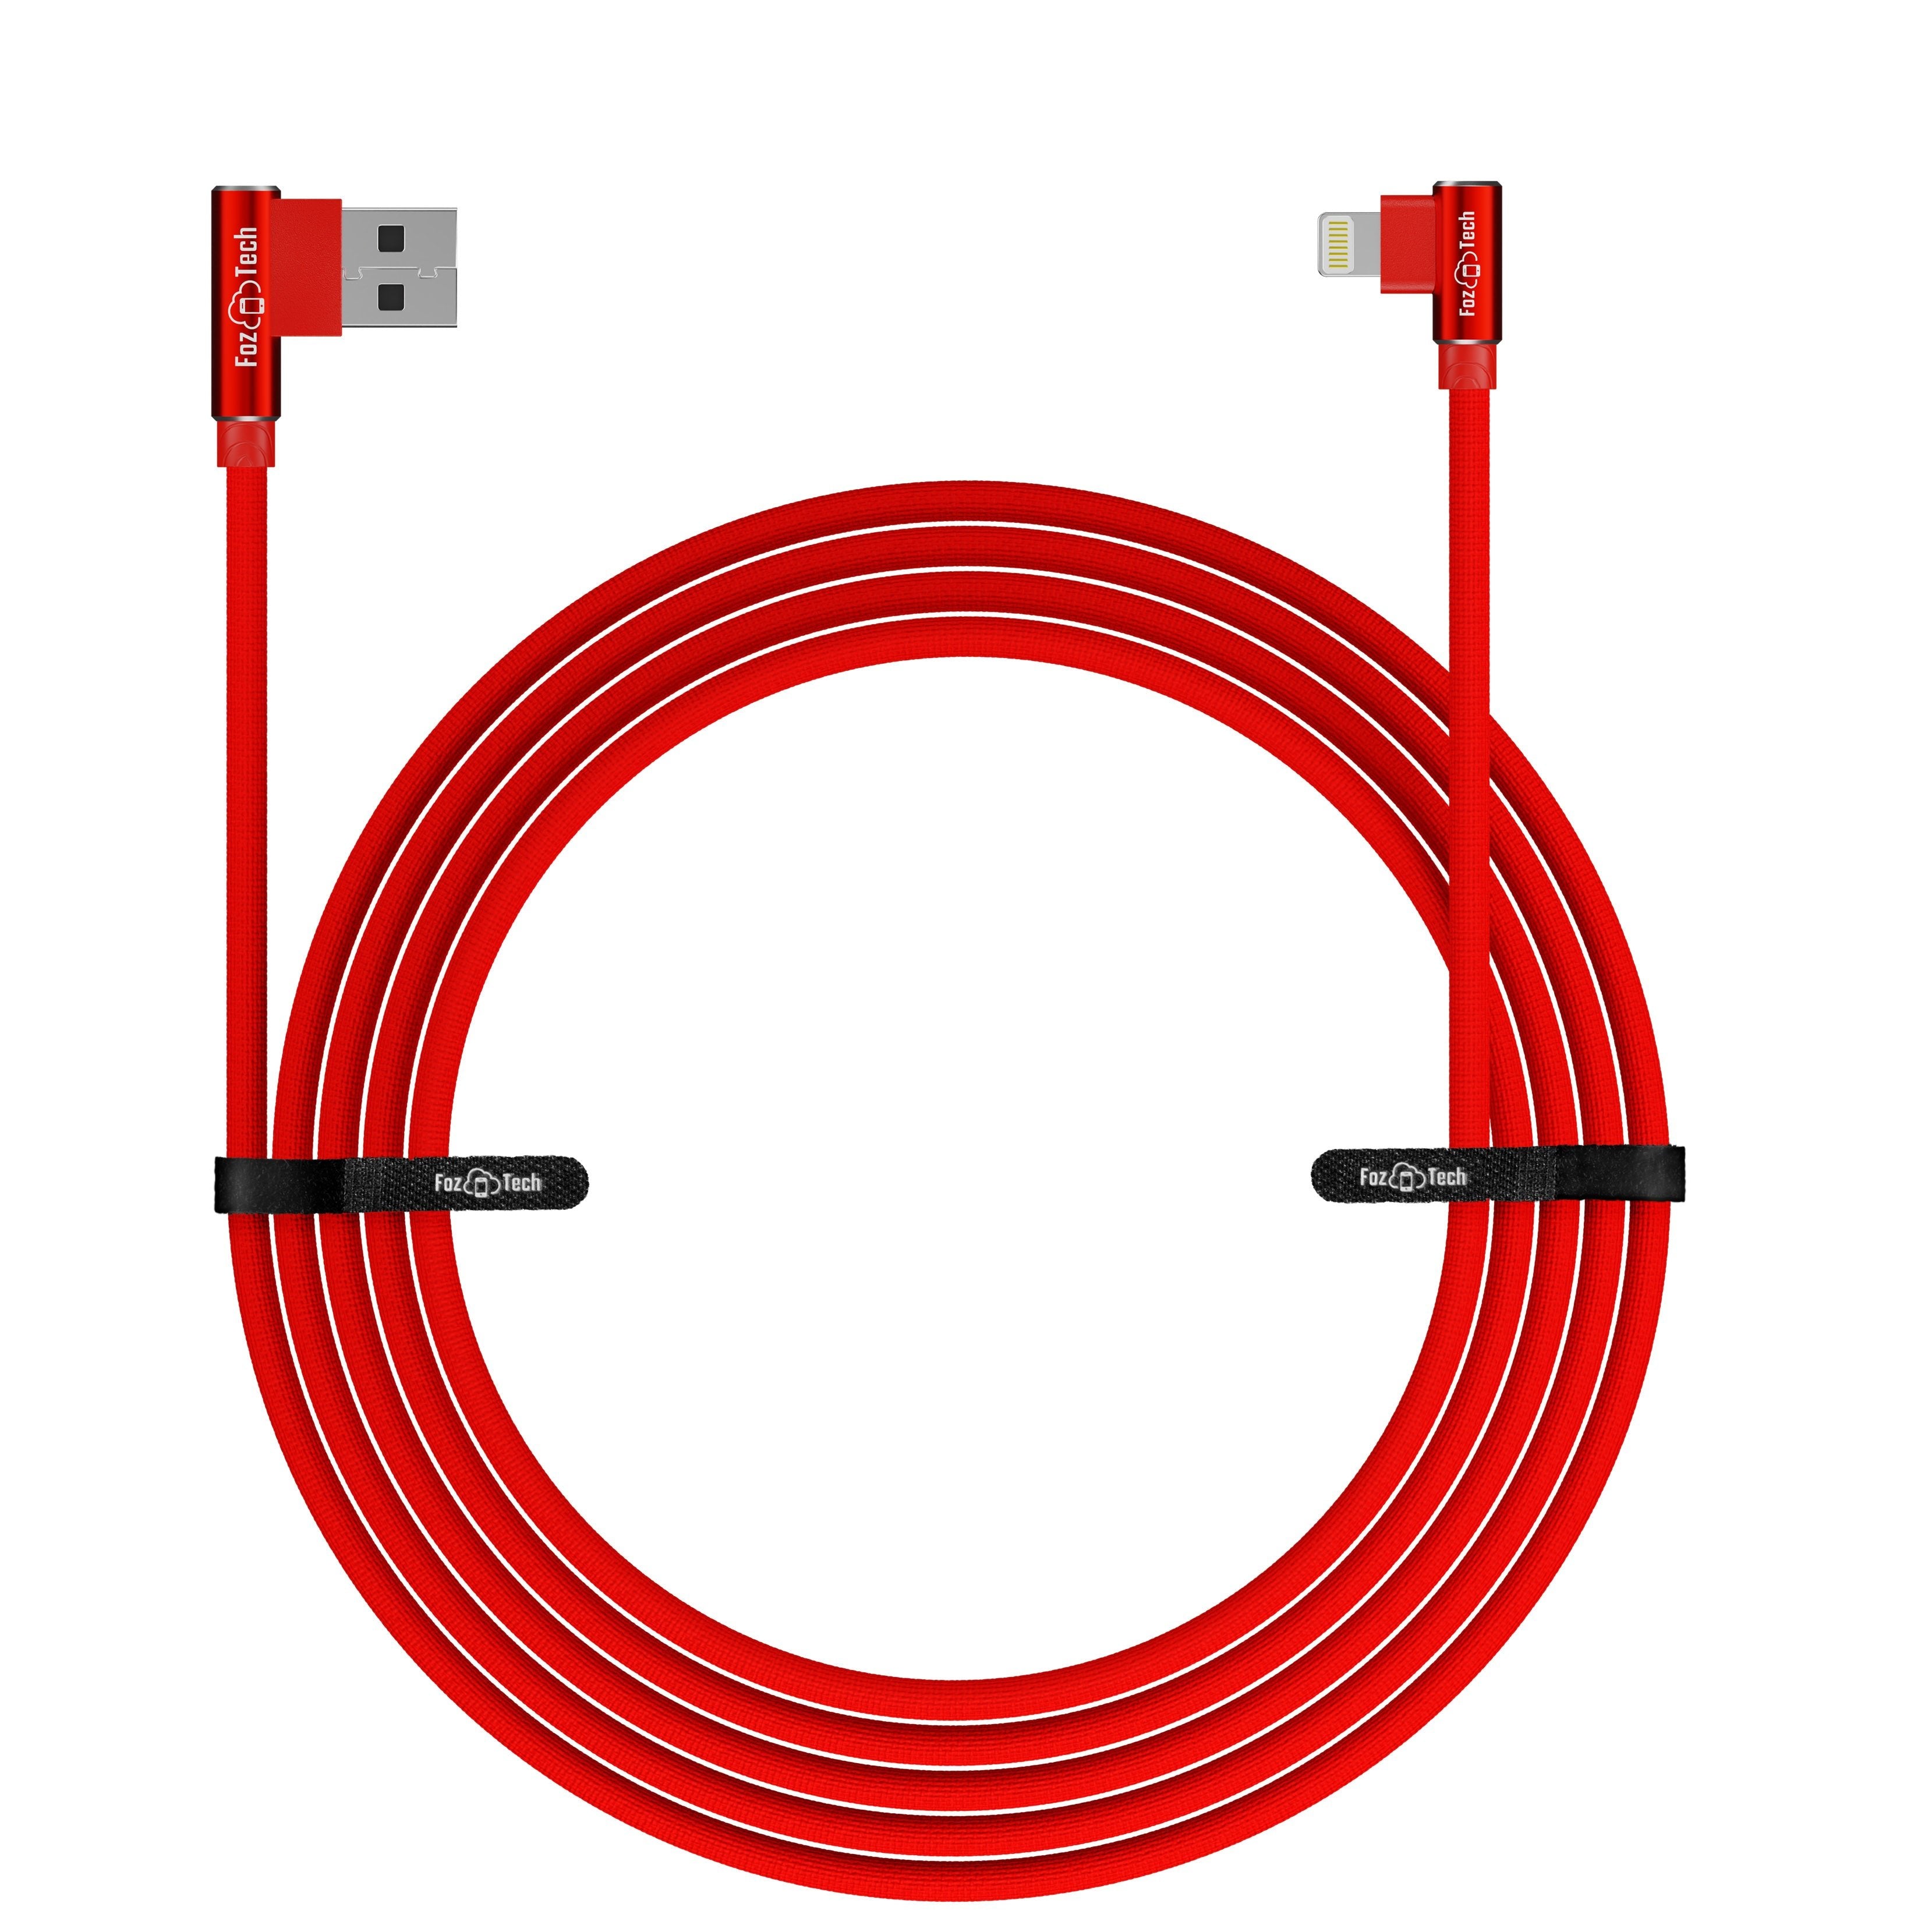 FozTech - Angled Series - Angled USB Charger Cable Data Sync Lead for iPhone, iPad, iPod - Red - USB Cable - FozTech